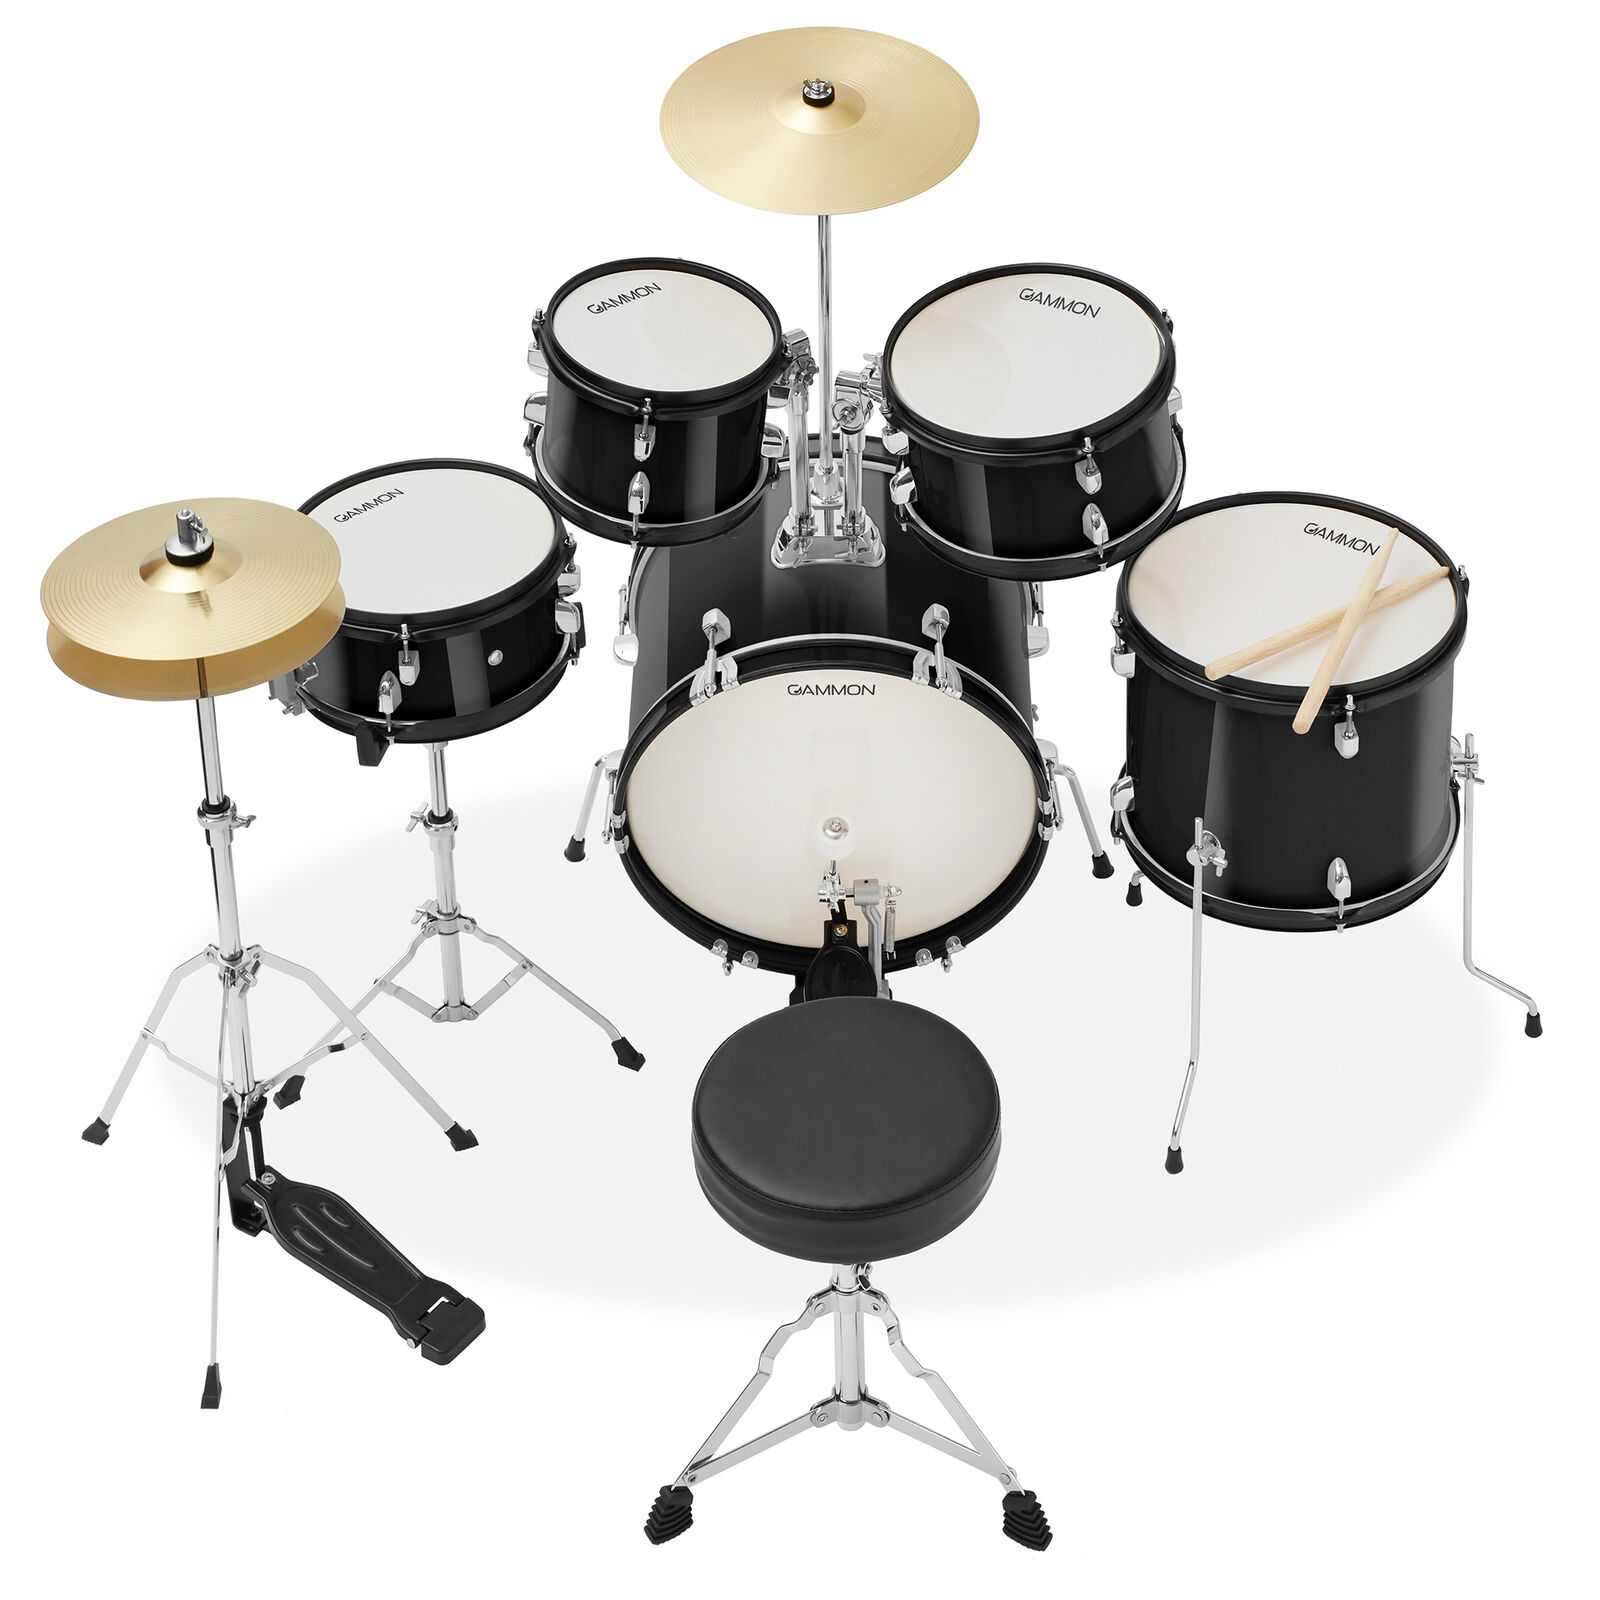 5-Piece Junior Drum Set, Beginner Percussion Kit with Stool and Stands 2